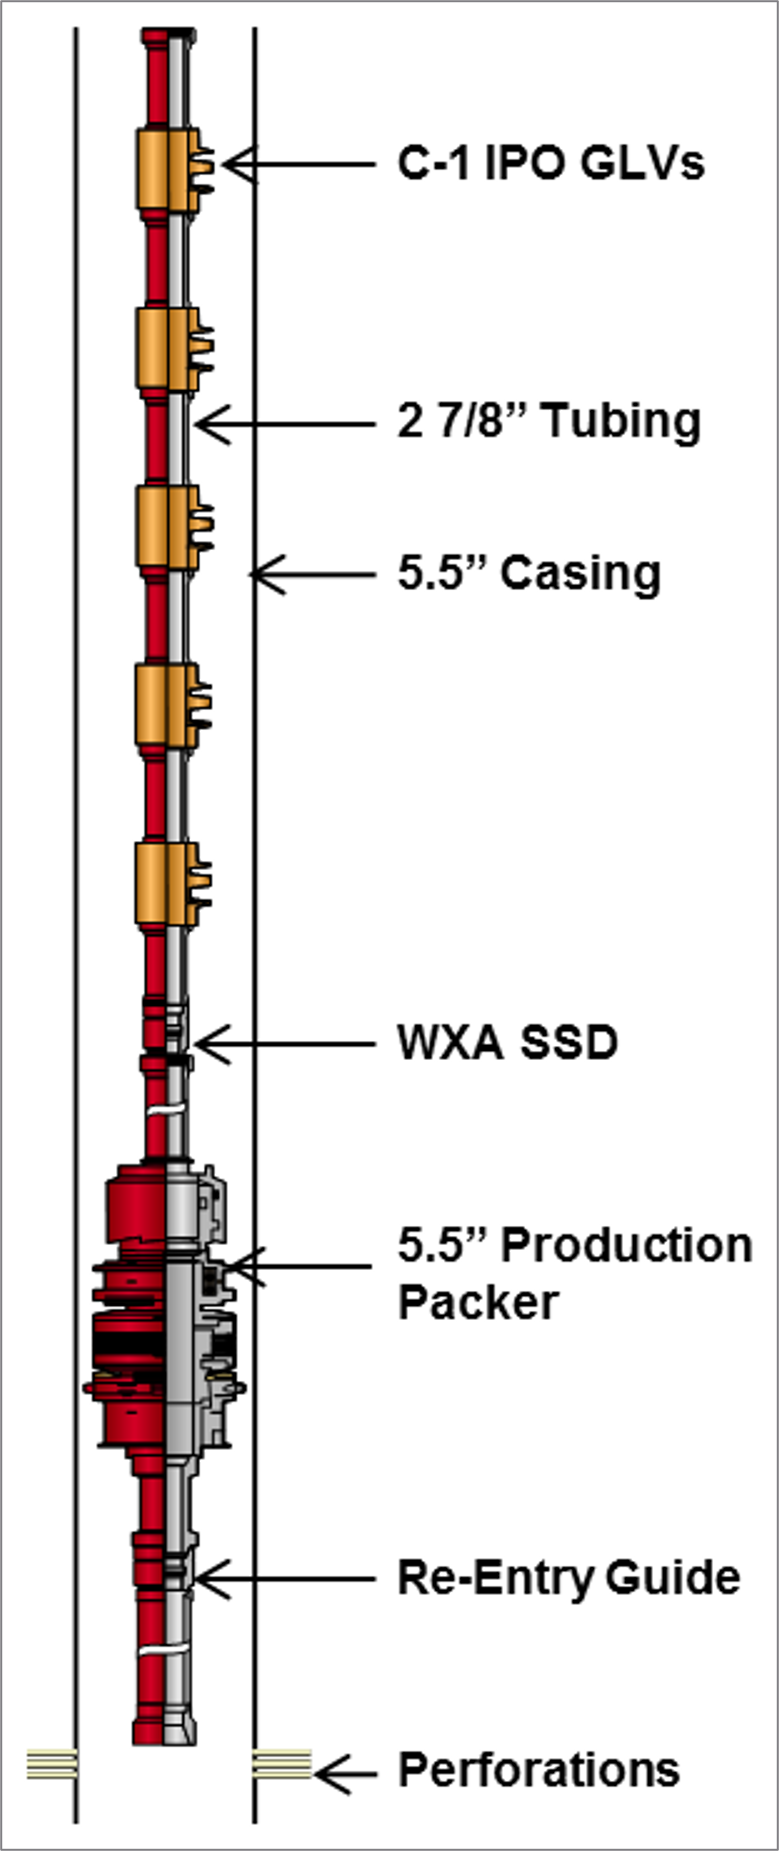 Weatherford’s gas lift system